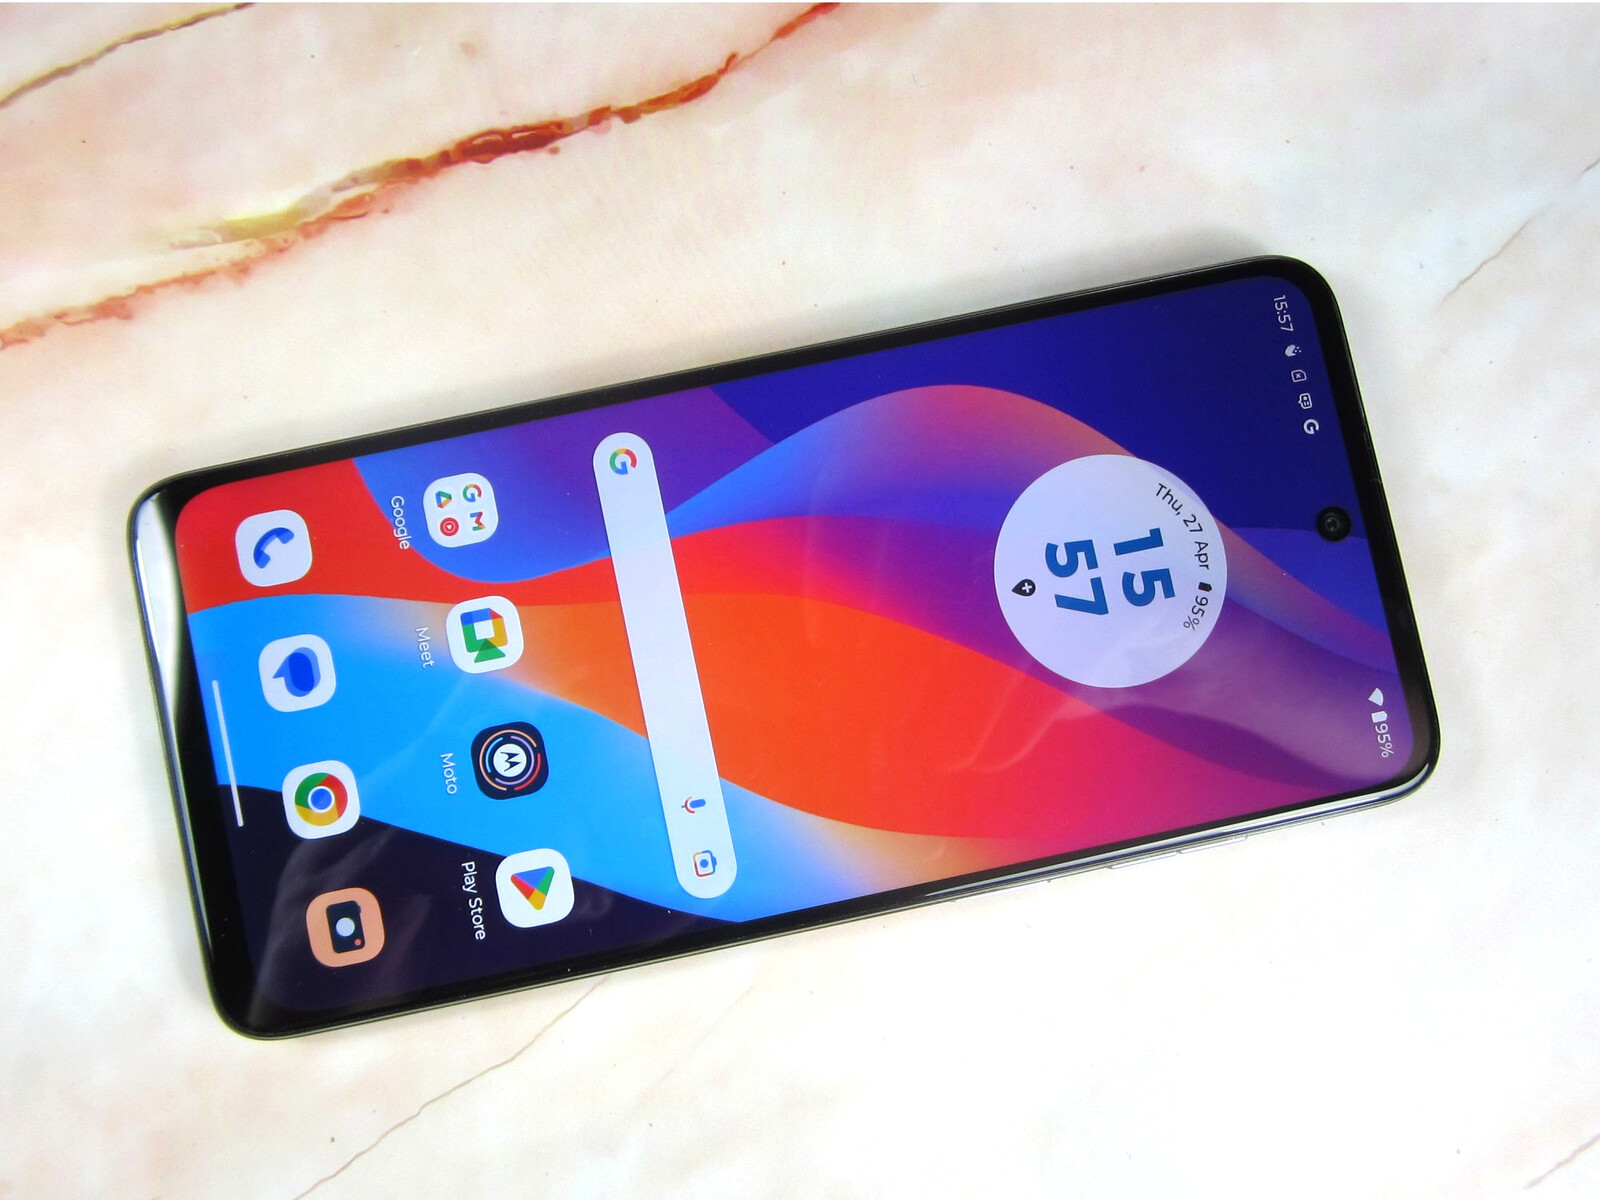 Moto G73 5G First Impressions: Focussing on 5G